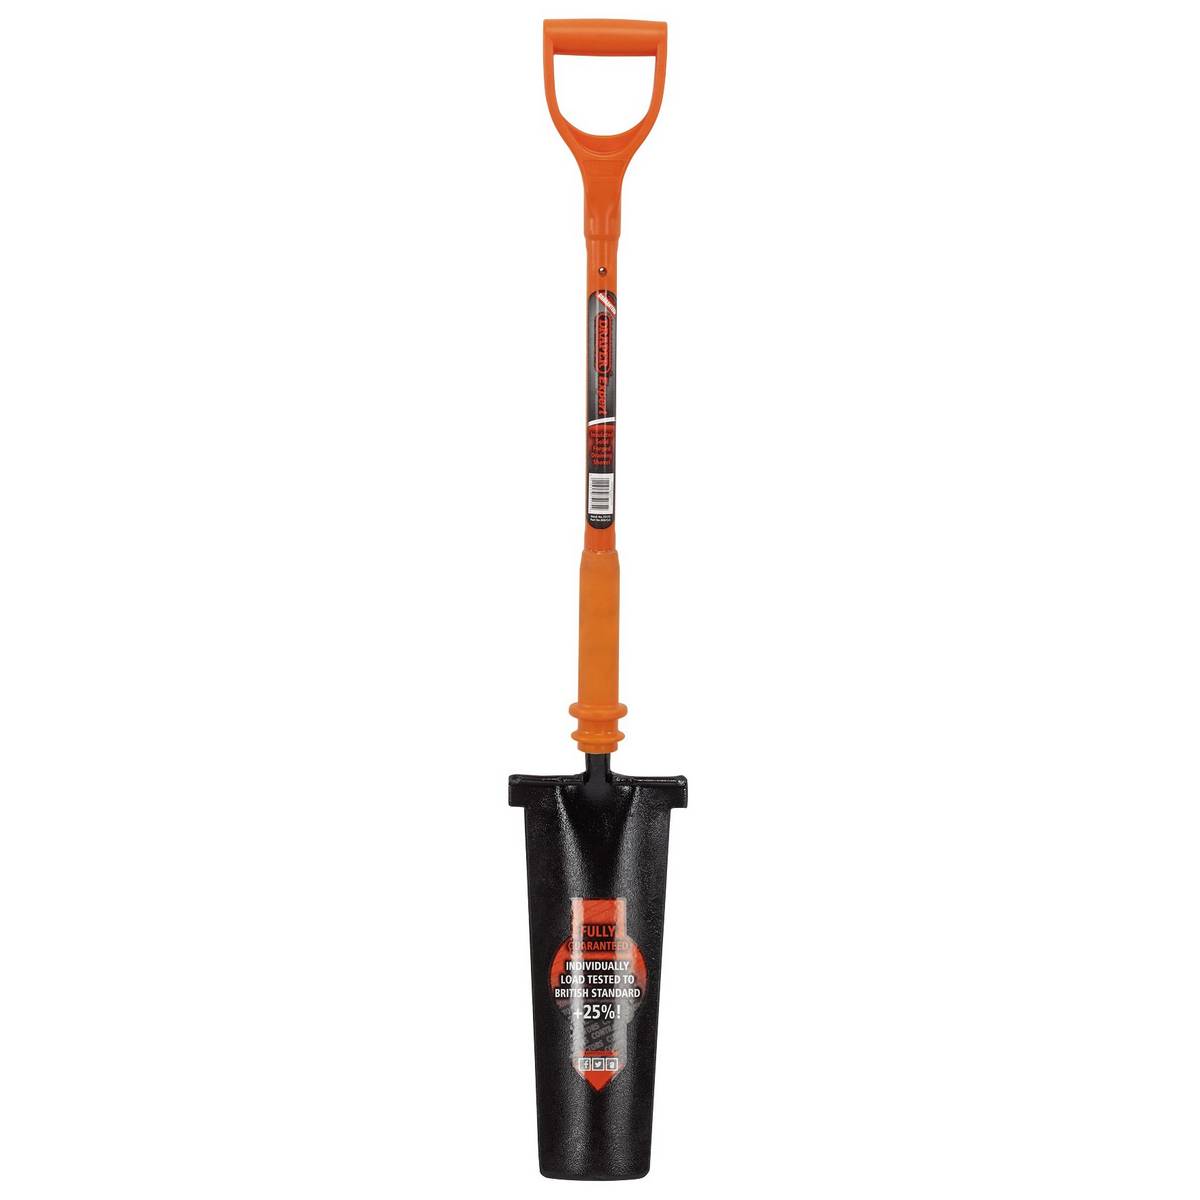 DRAPER EXPERT FULLY INSULATED CONTRACTORS DRAINAGE SHOVEL